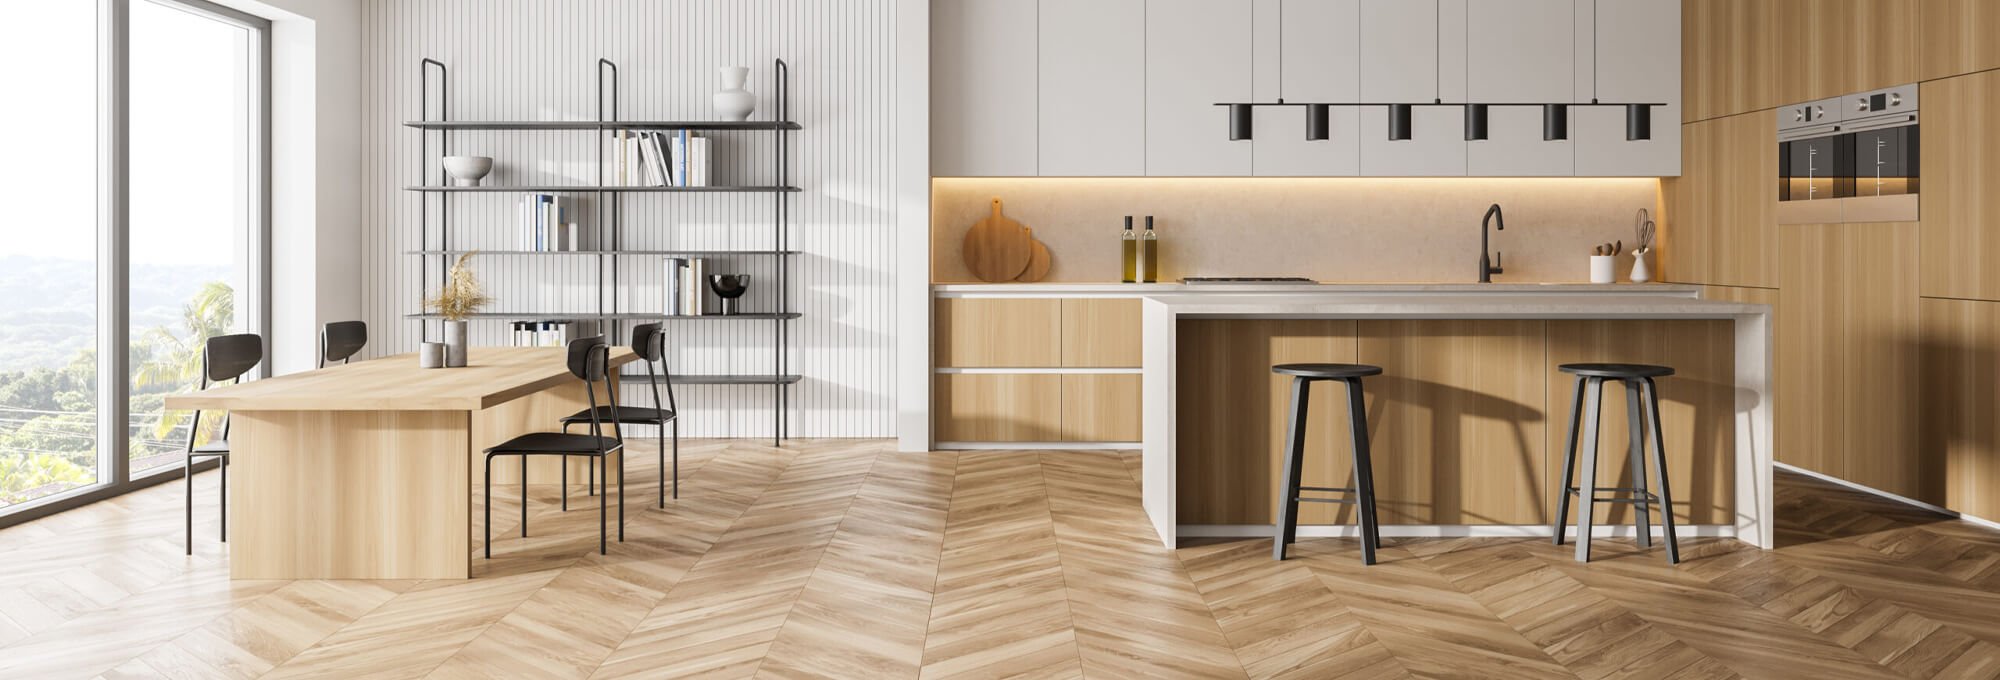 Shop Flooring Products from Michigan Tile inHolland